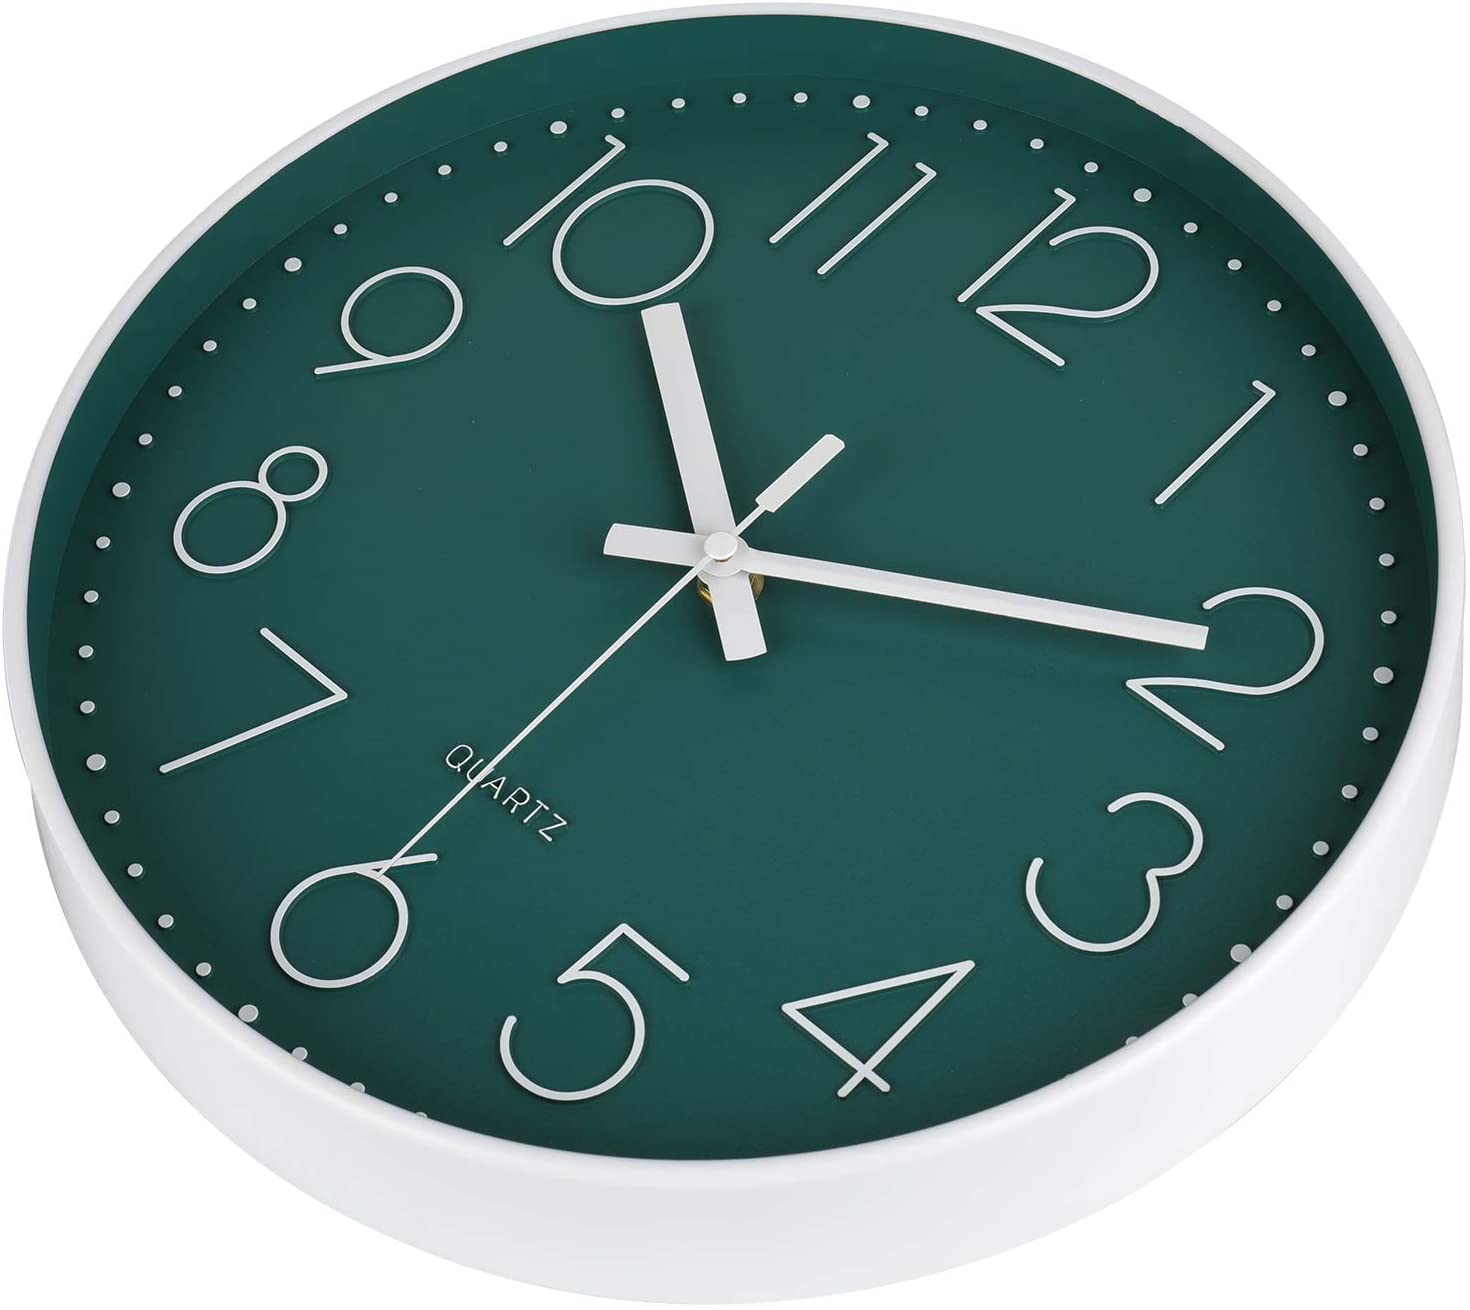 8138-12-Turquoise 12 Inch Silent Non-Ticking Battery Operated Round Wall Clock Easy to Read Clocks ( Turquoise Color )